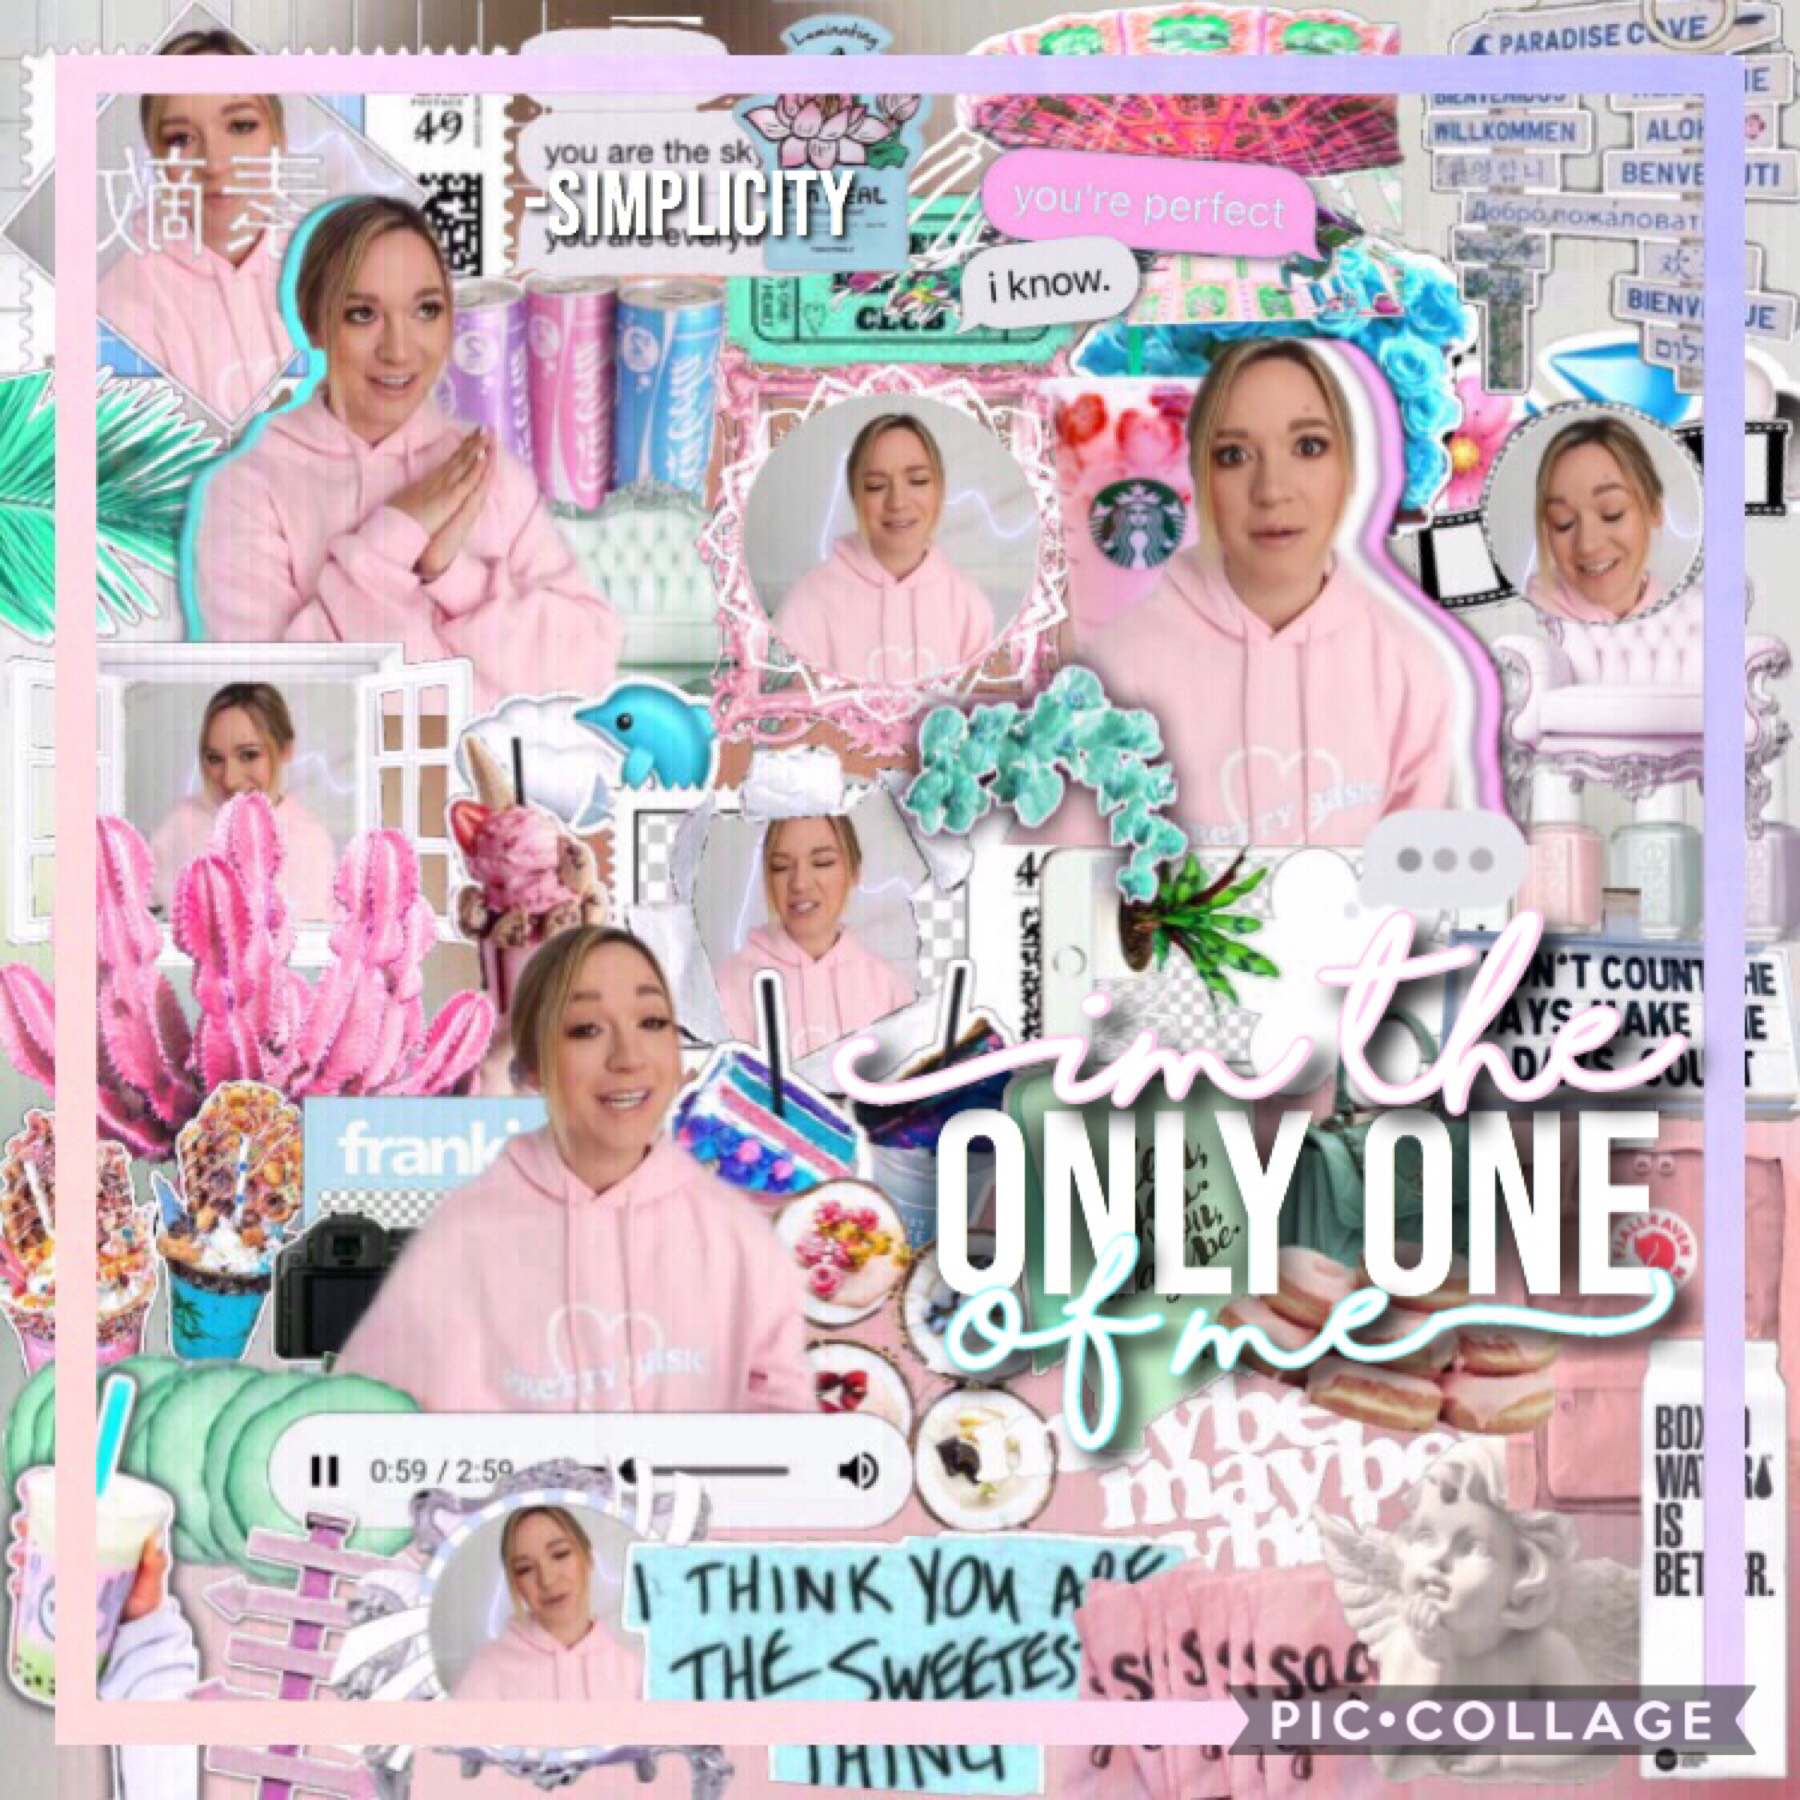 Hey guys!! Sorry I haven’t posted in quite a bit! Here’s a kind of pastel themed edit, it’s a remake of one of my old edits and it looks really different. Hope you enjoy this edit!❤️